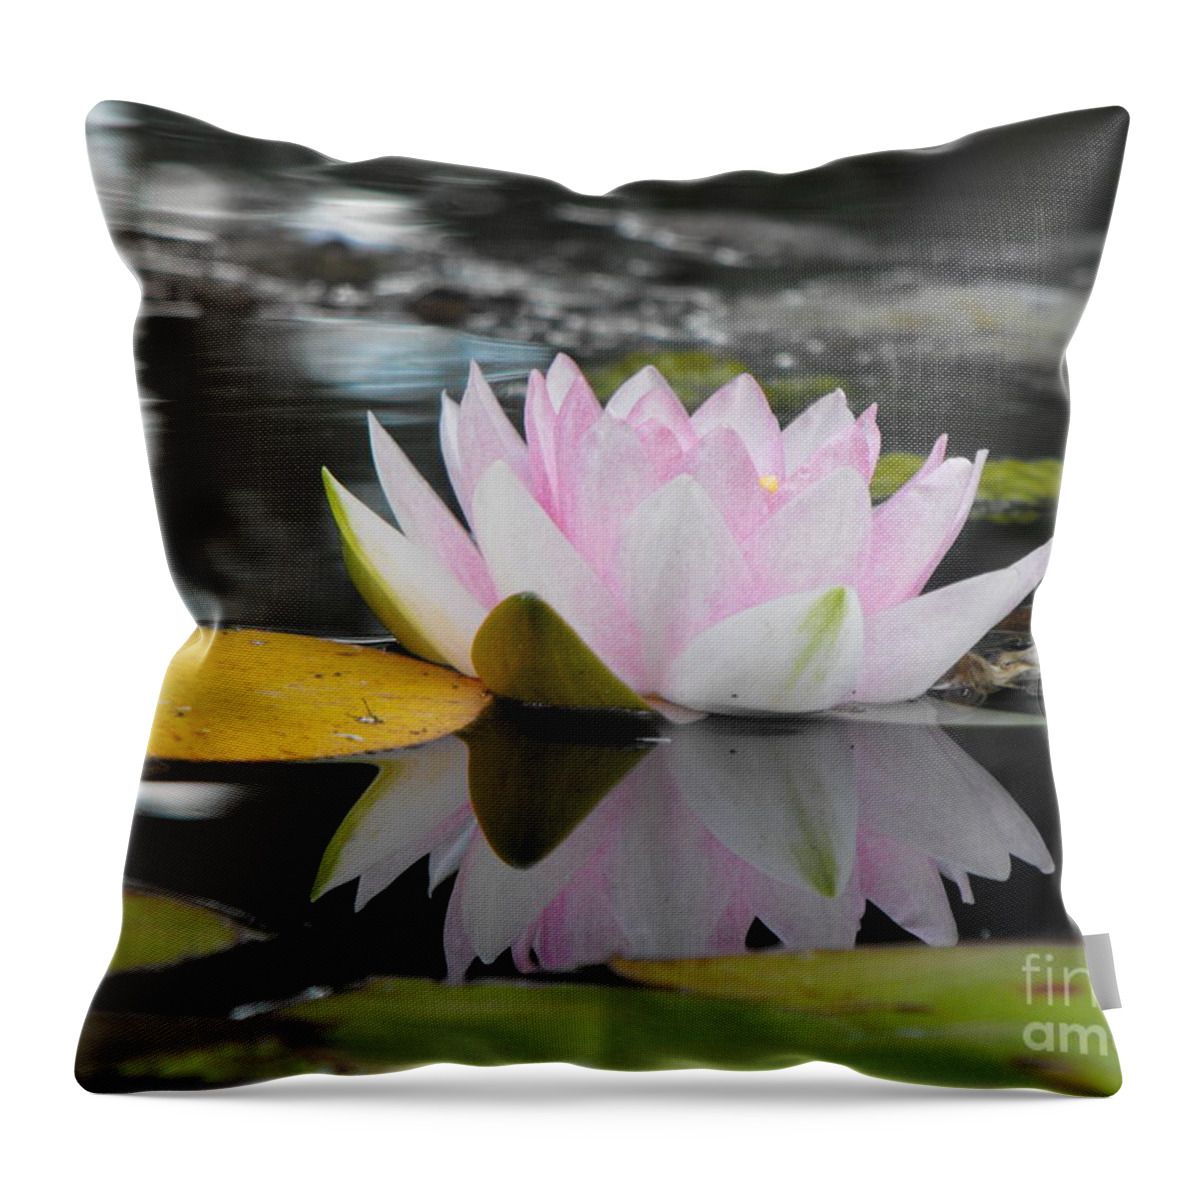 Lily Throw Pillow featuring the photograph Lily Reflection by Erick Schmidt